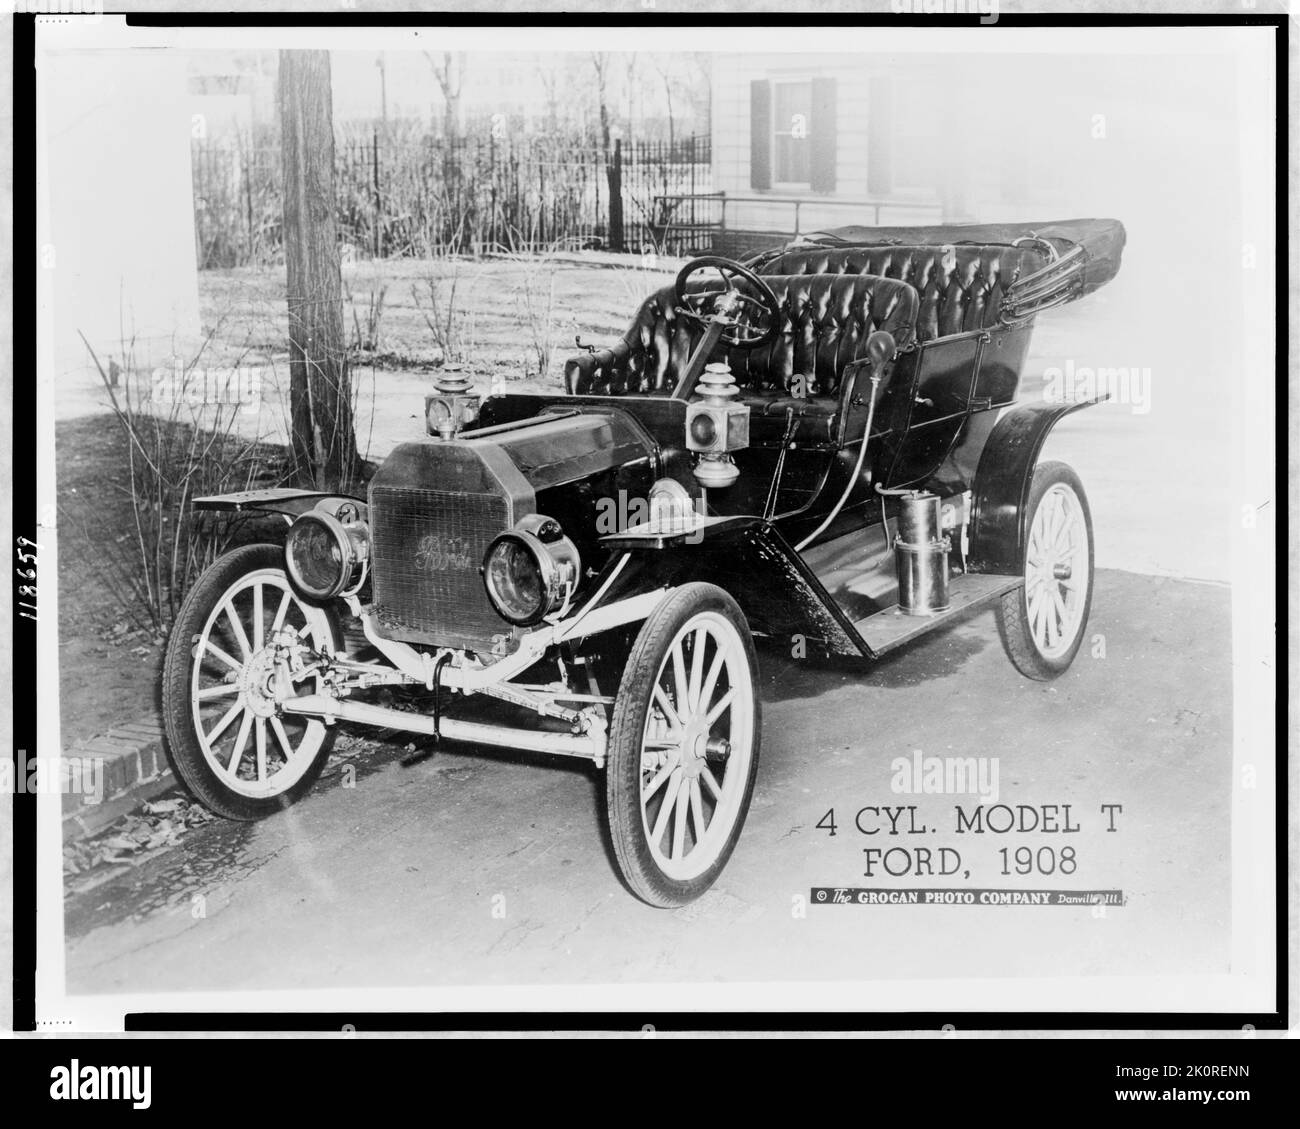 Three-quarter view of a 4 cylinder Model T Ford, Danville, IL, 1908. (Photo by Grogan Photo Company) Stock Photo